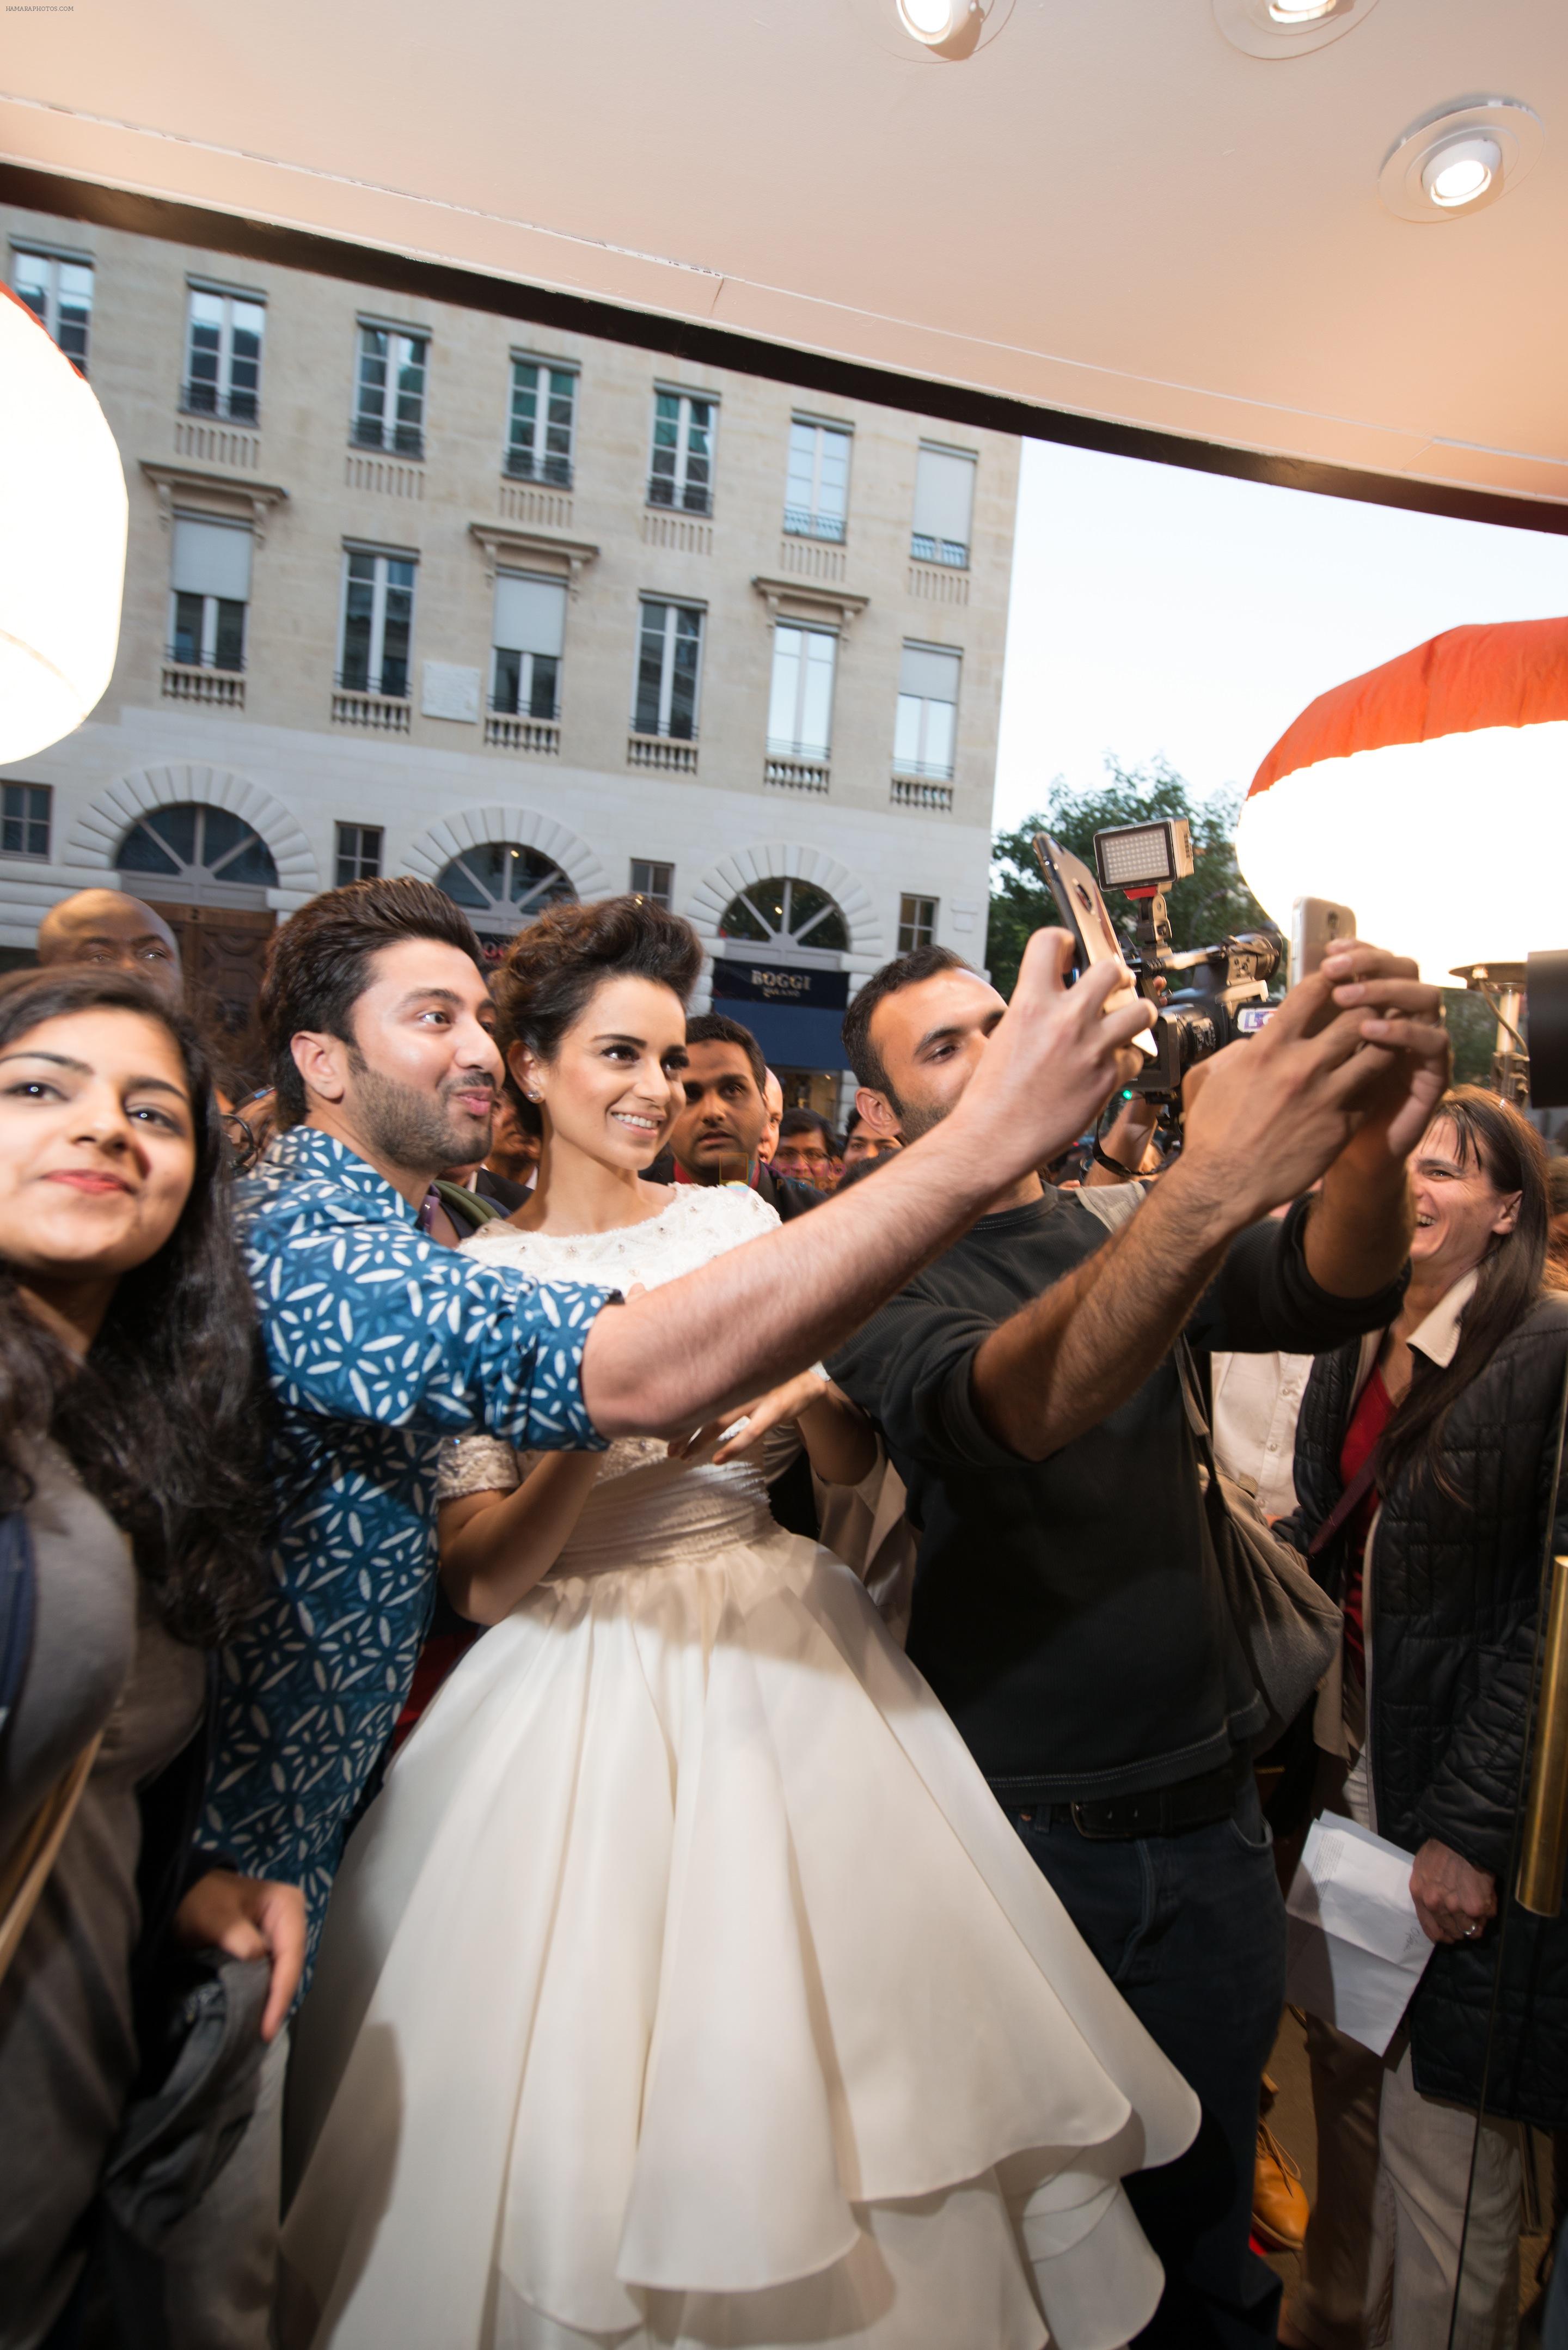 Kangana Ranaut gets a Queen's welcome in Paris